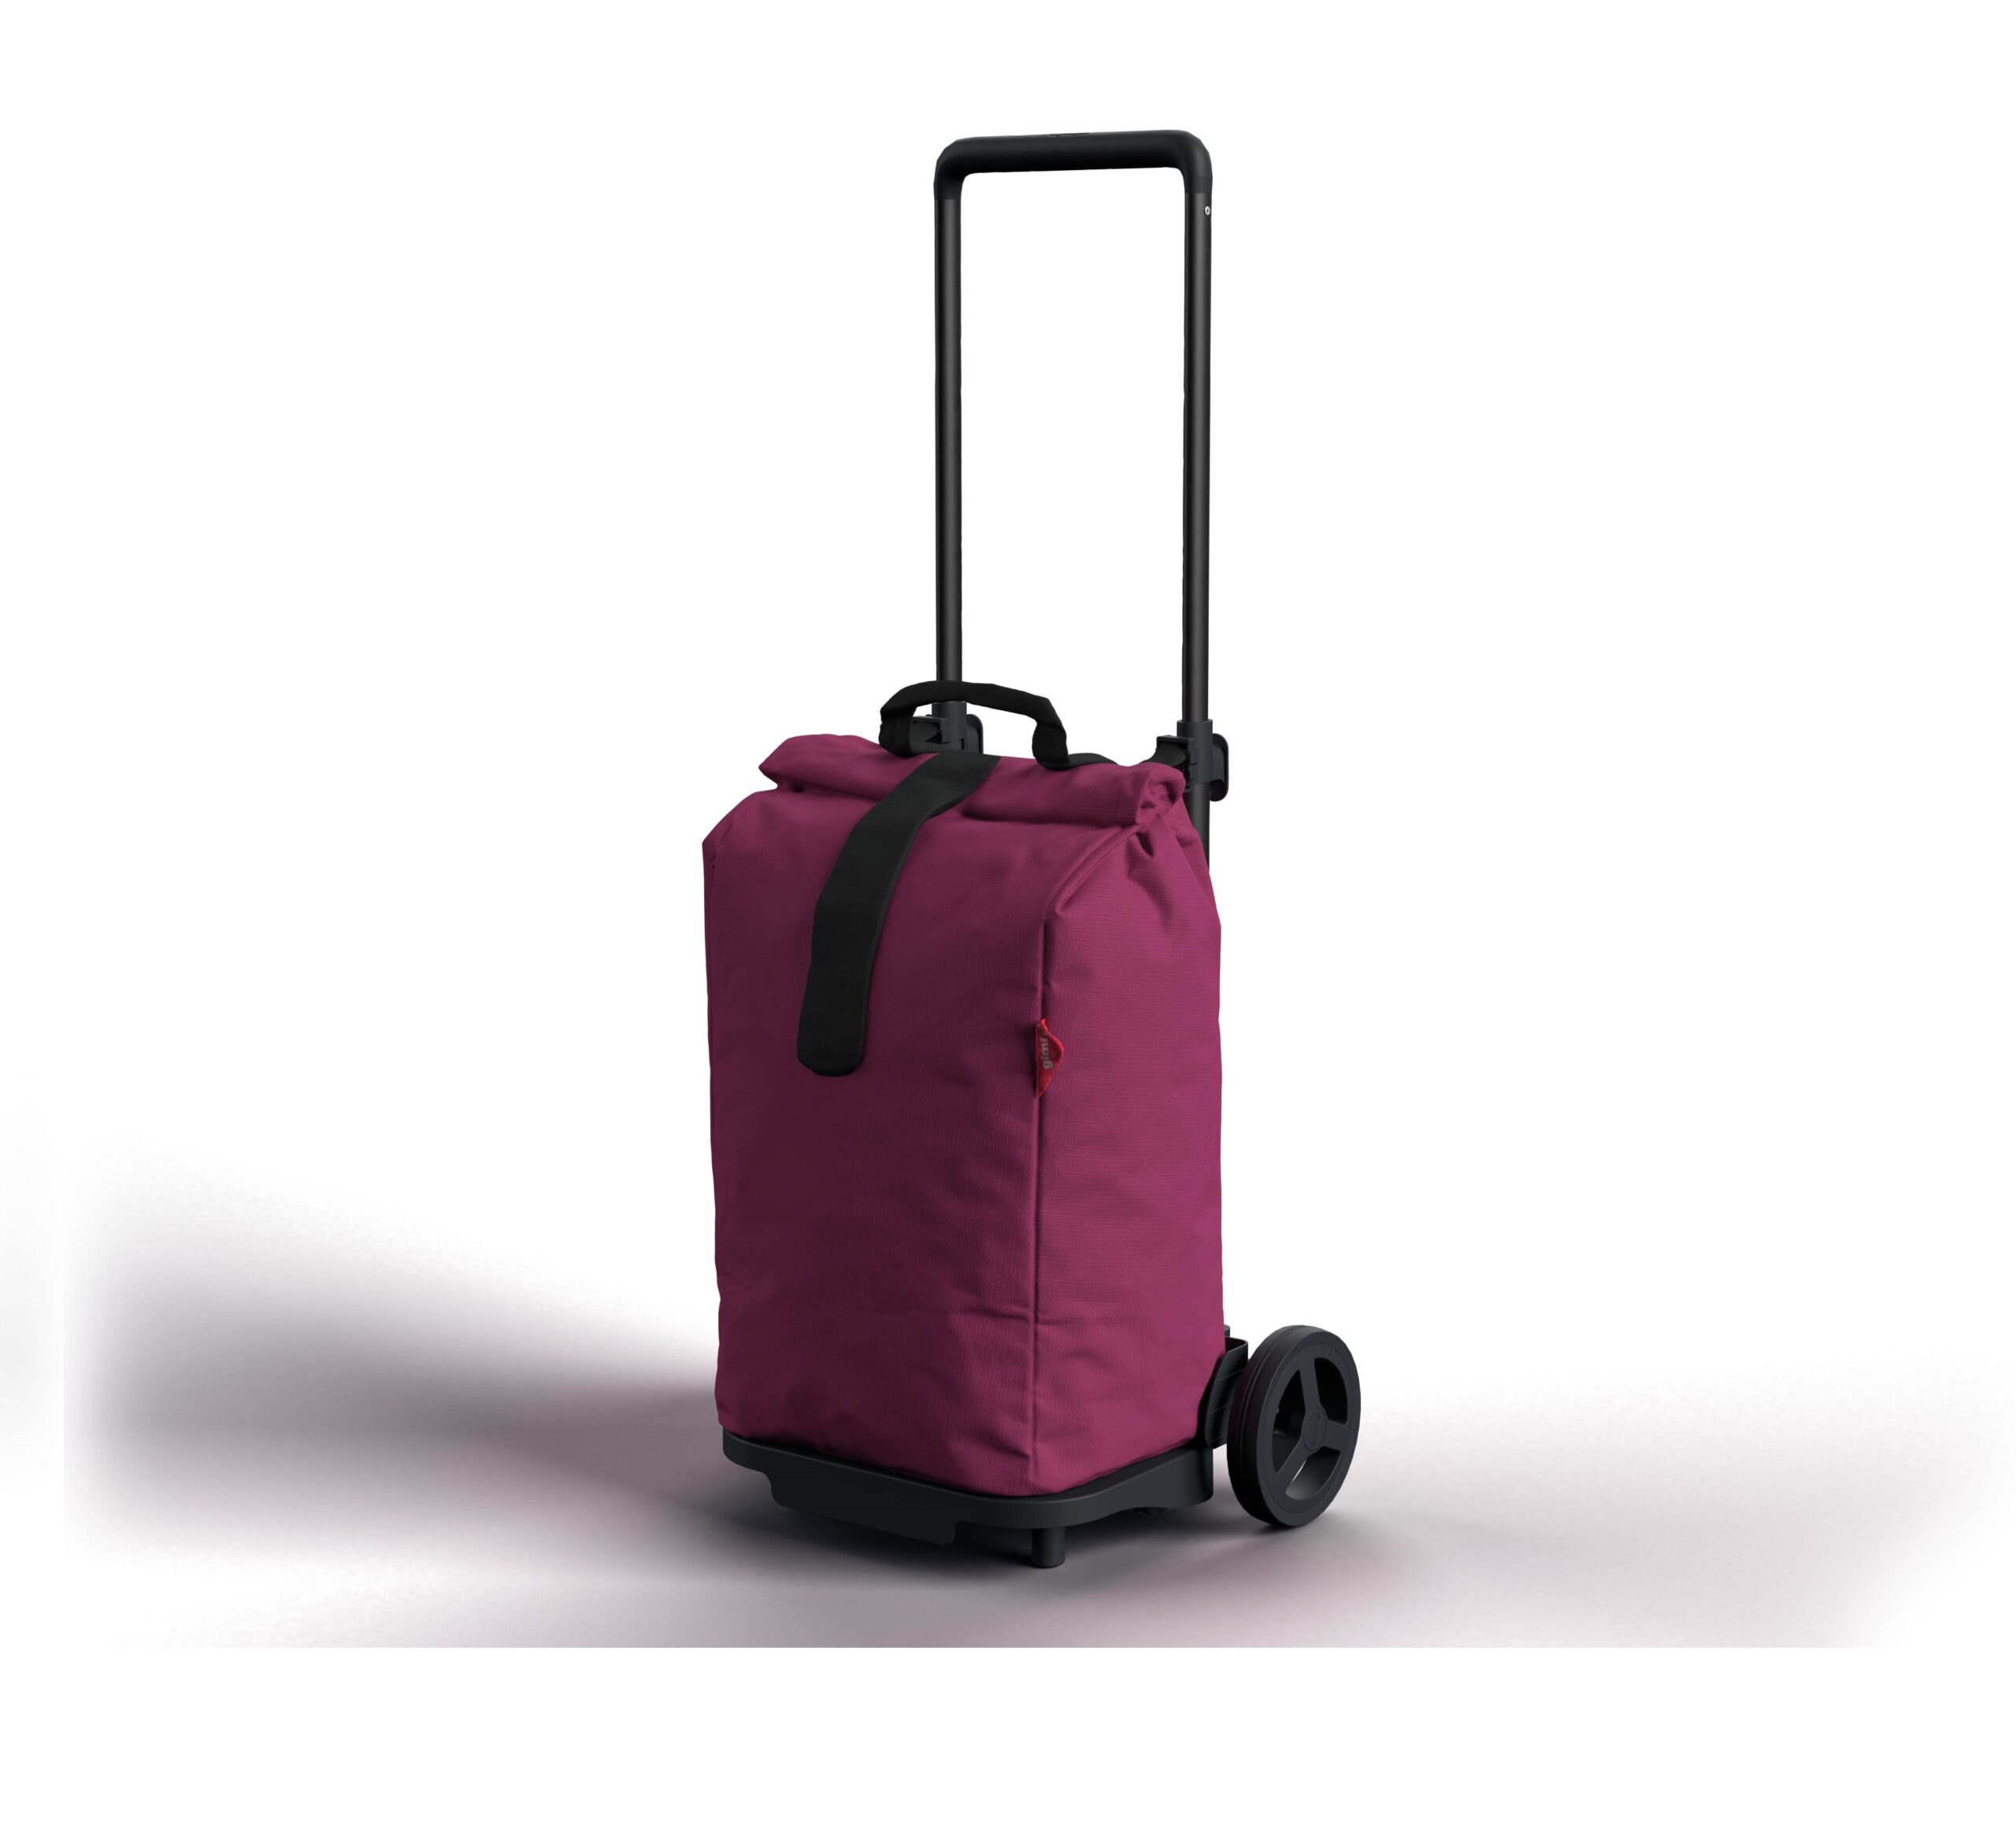 GIMI SHOPPING TROLLEY VIOLET